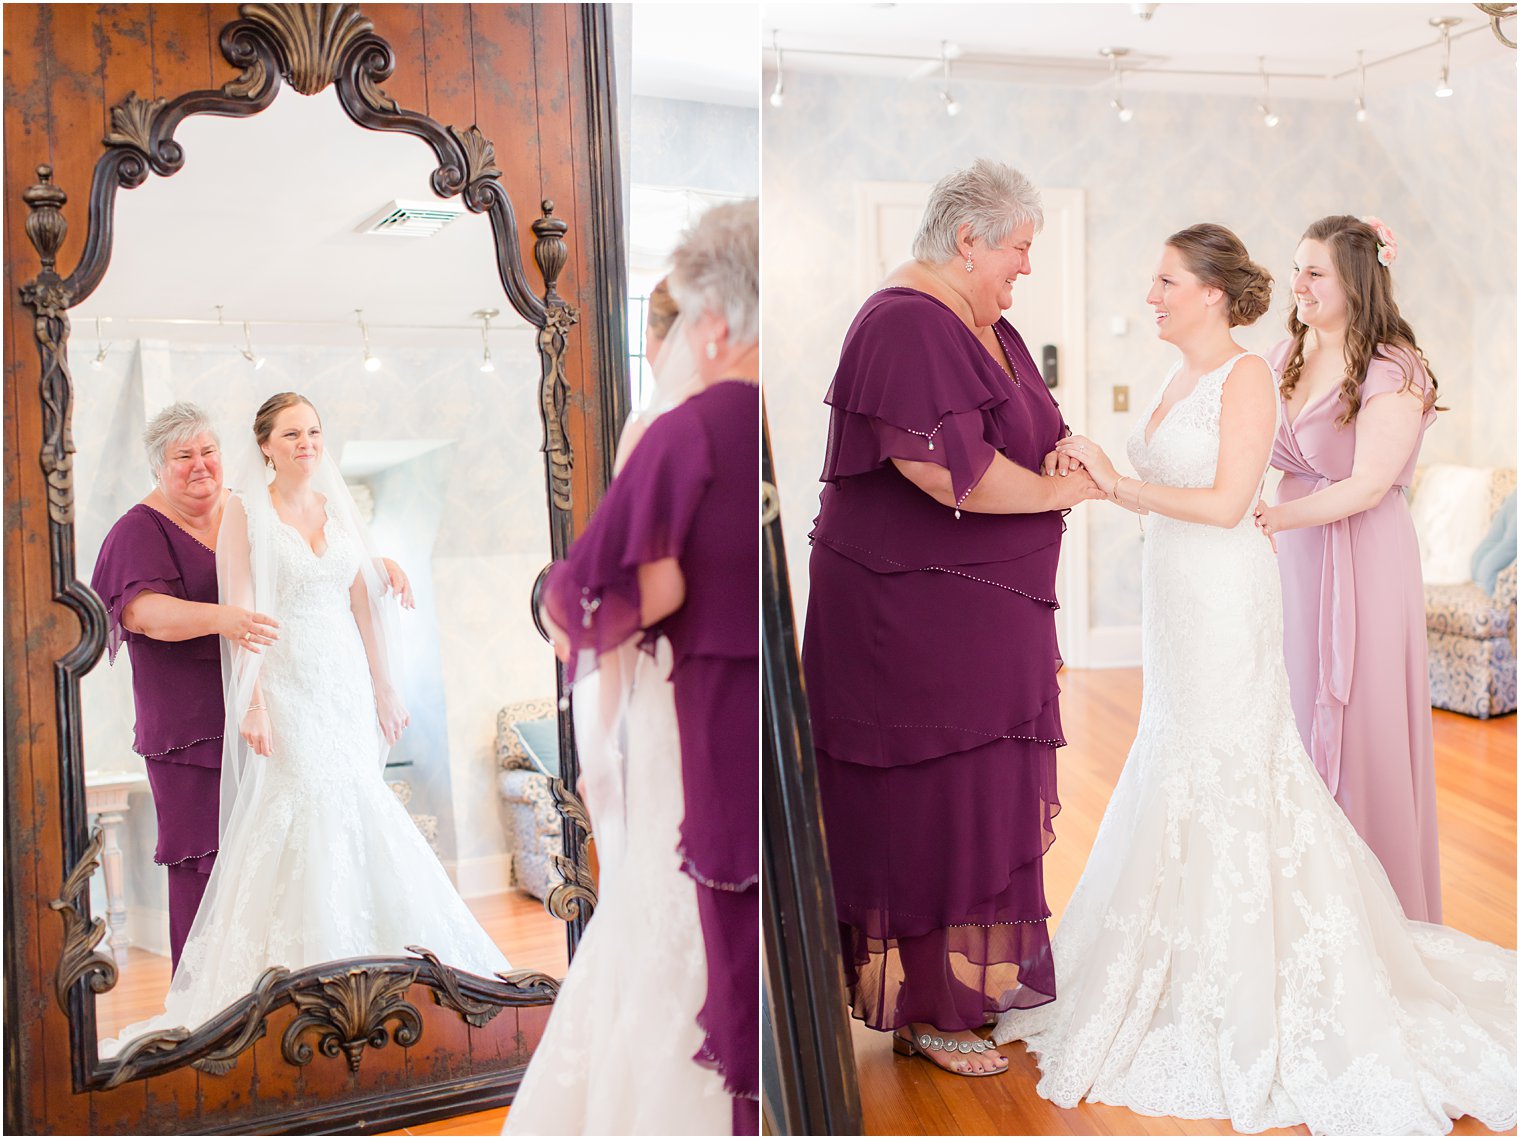 intimate moments between bride, mom, and sister